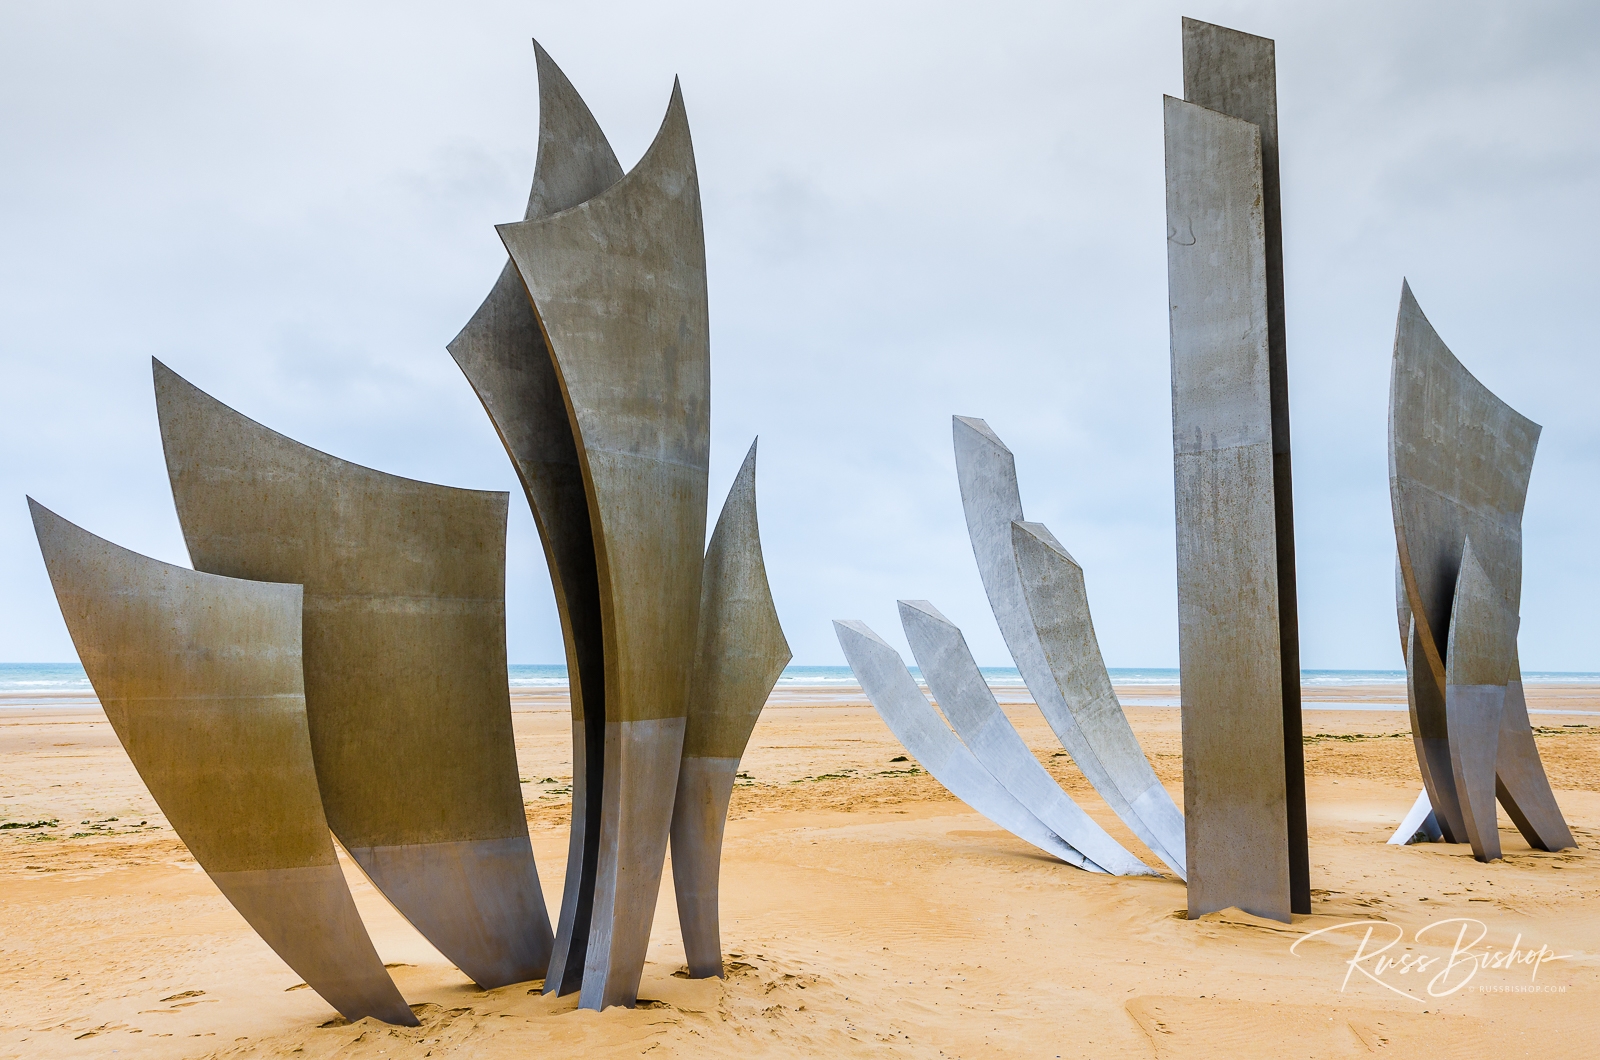 A Different Ground Zero. Les Braves WWII D-day monument on Omaha Beach created by French sculptor Anilore Banon, Normandy, France